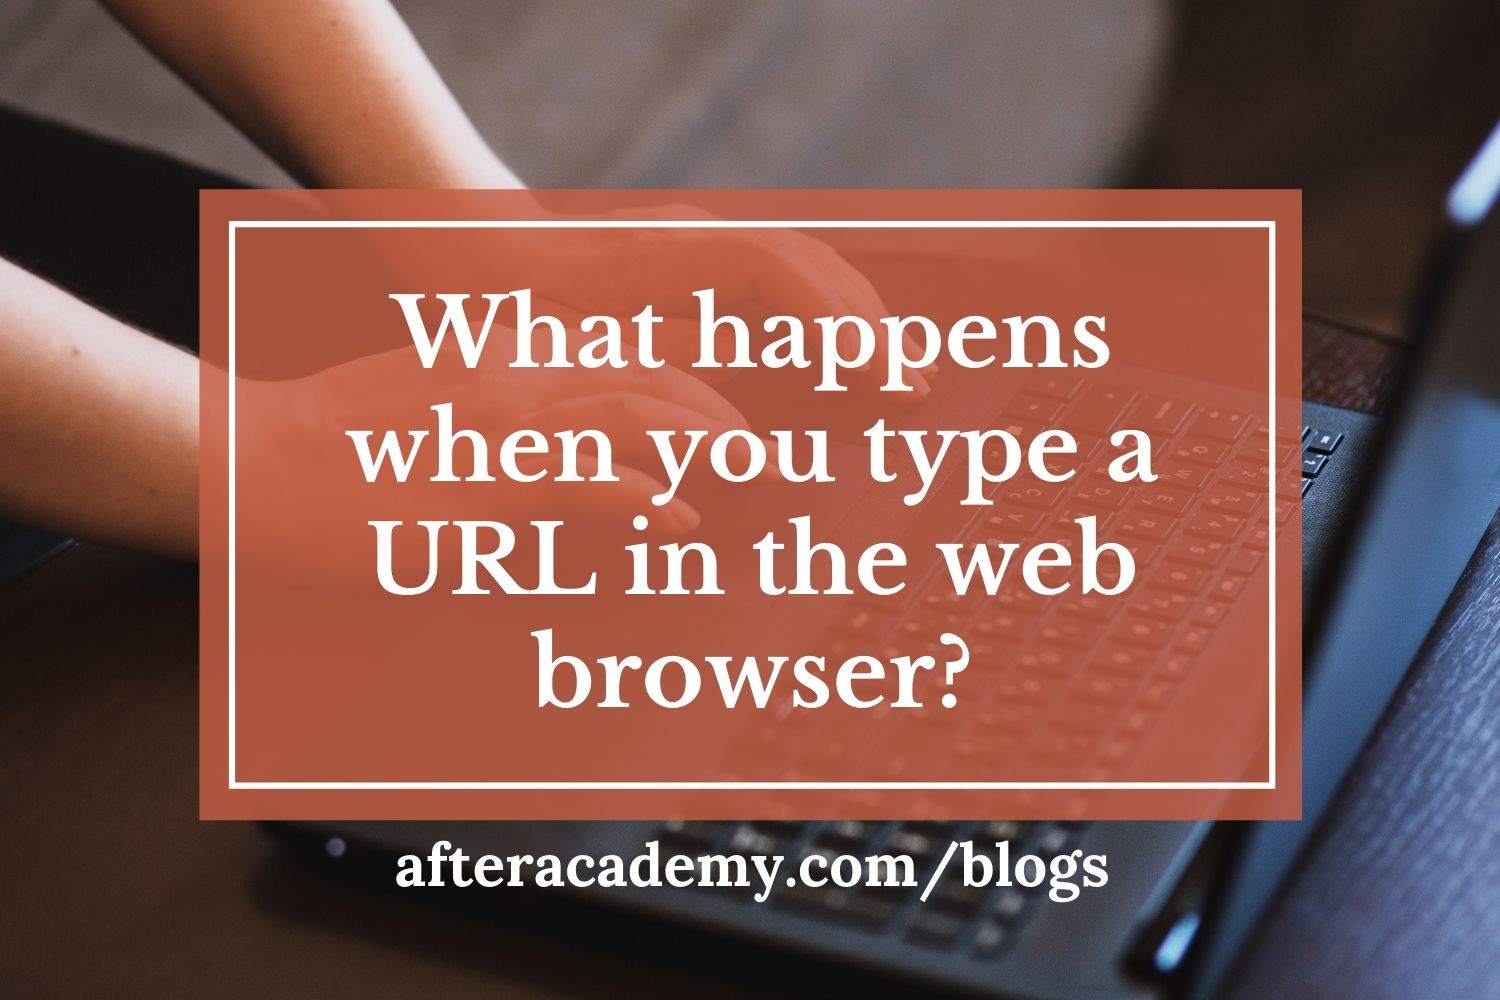 What happens when you type a URL in the web browser?